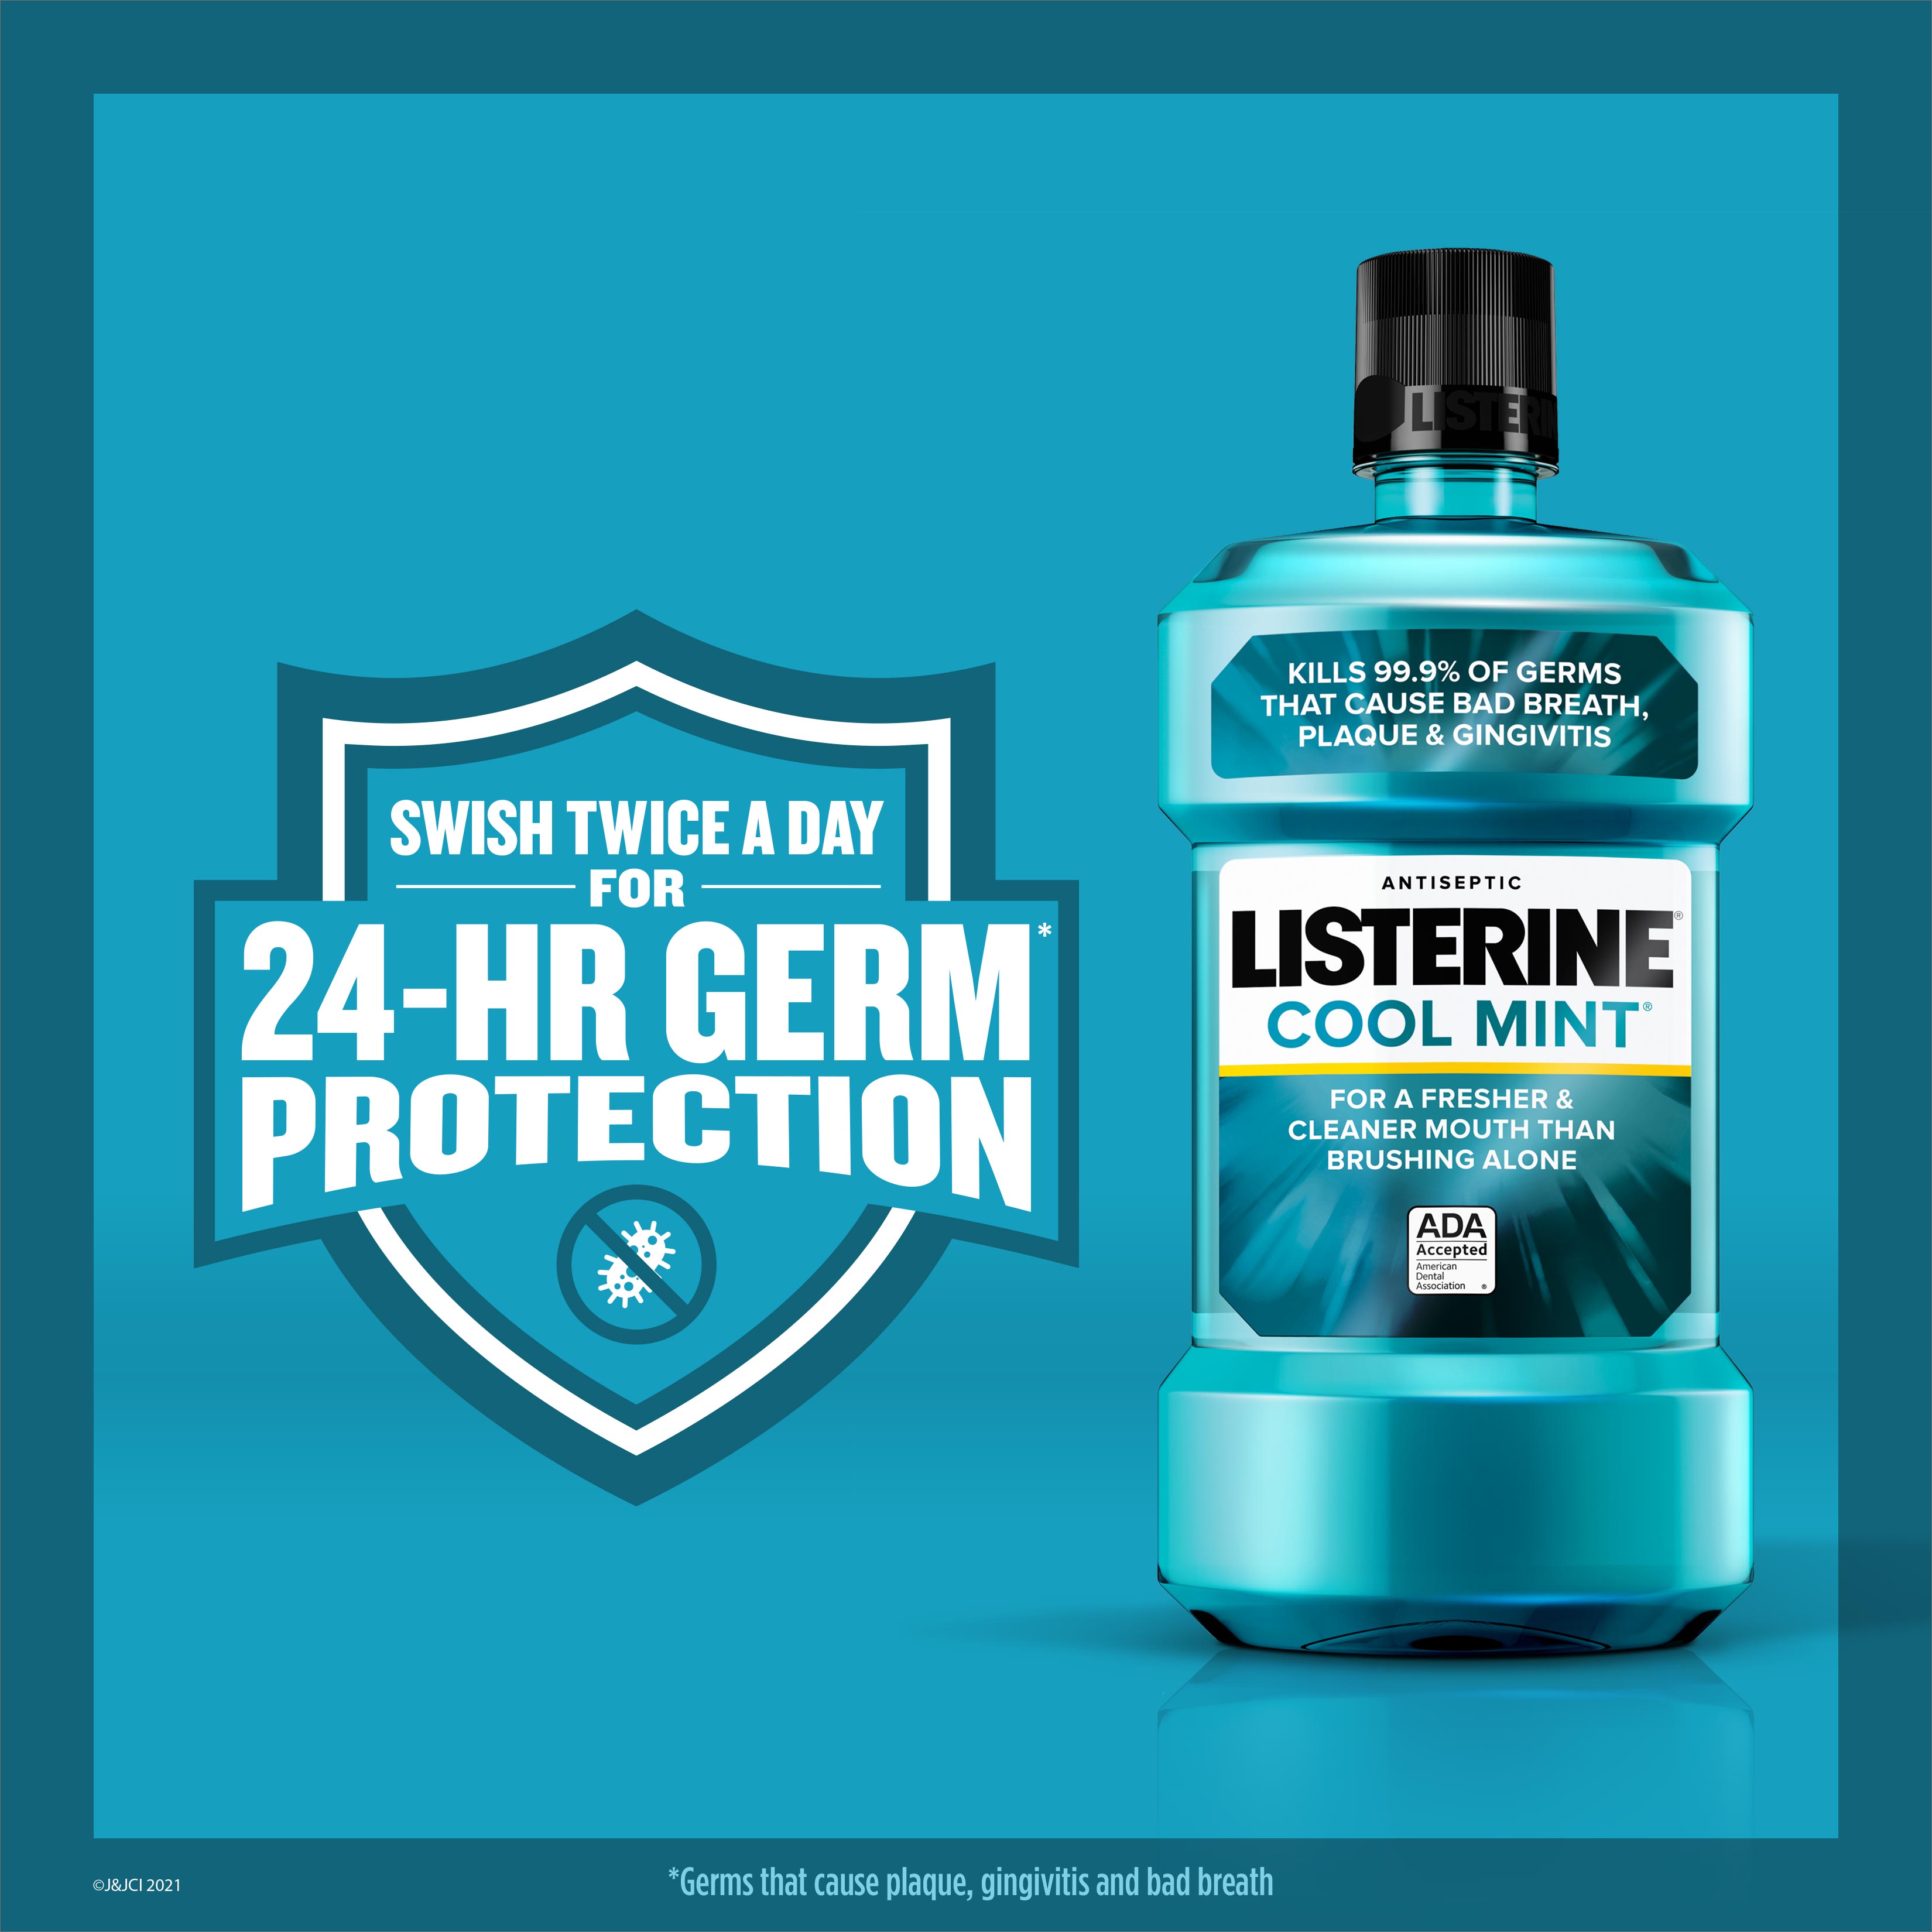 COOL MINT® Antiseptic Mouthwash for Bad Breath & Plaque